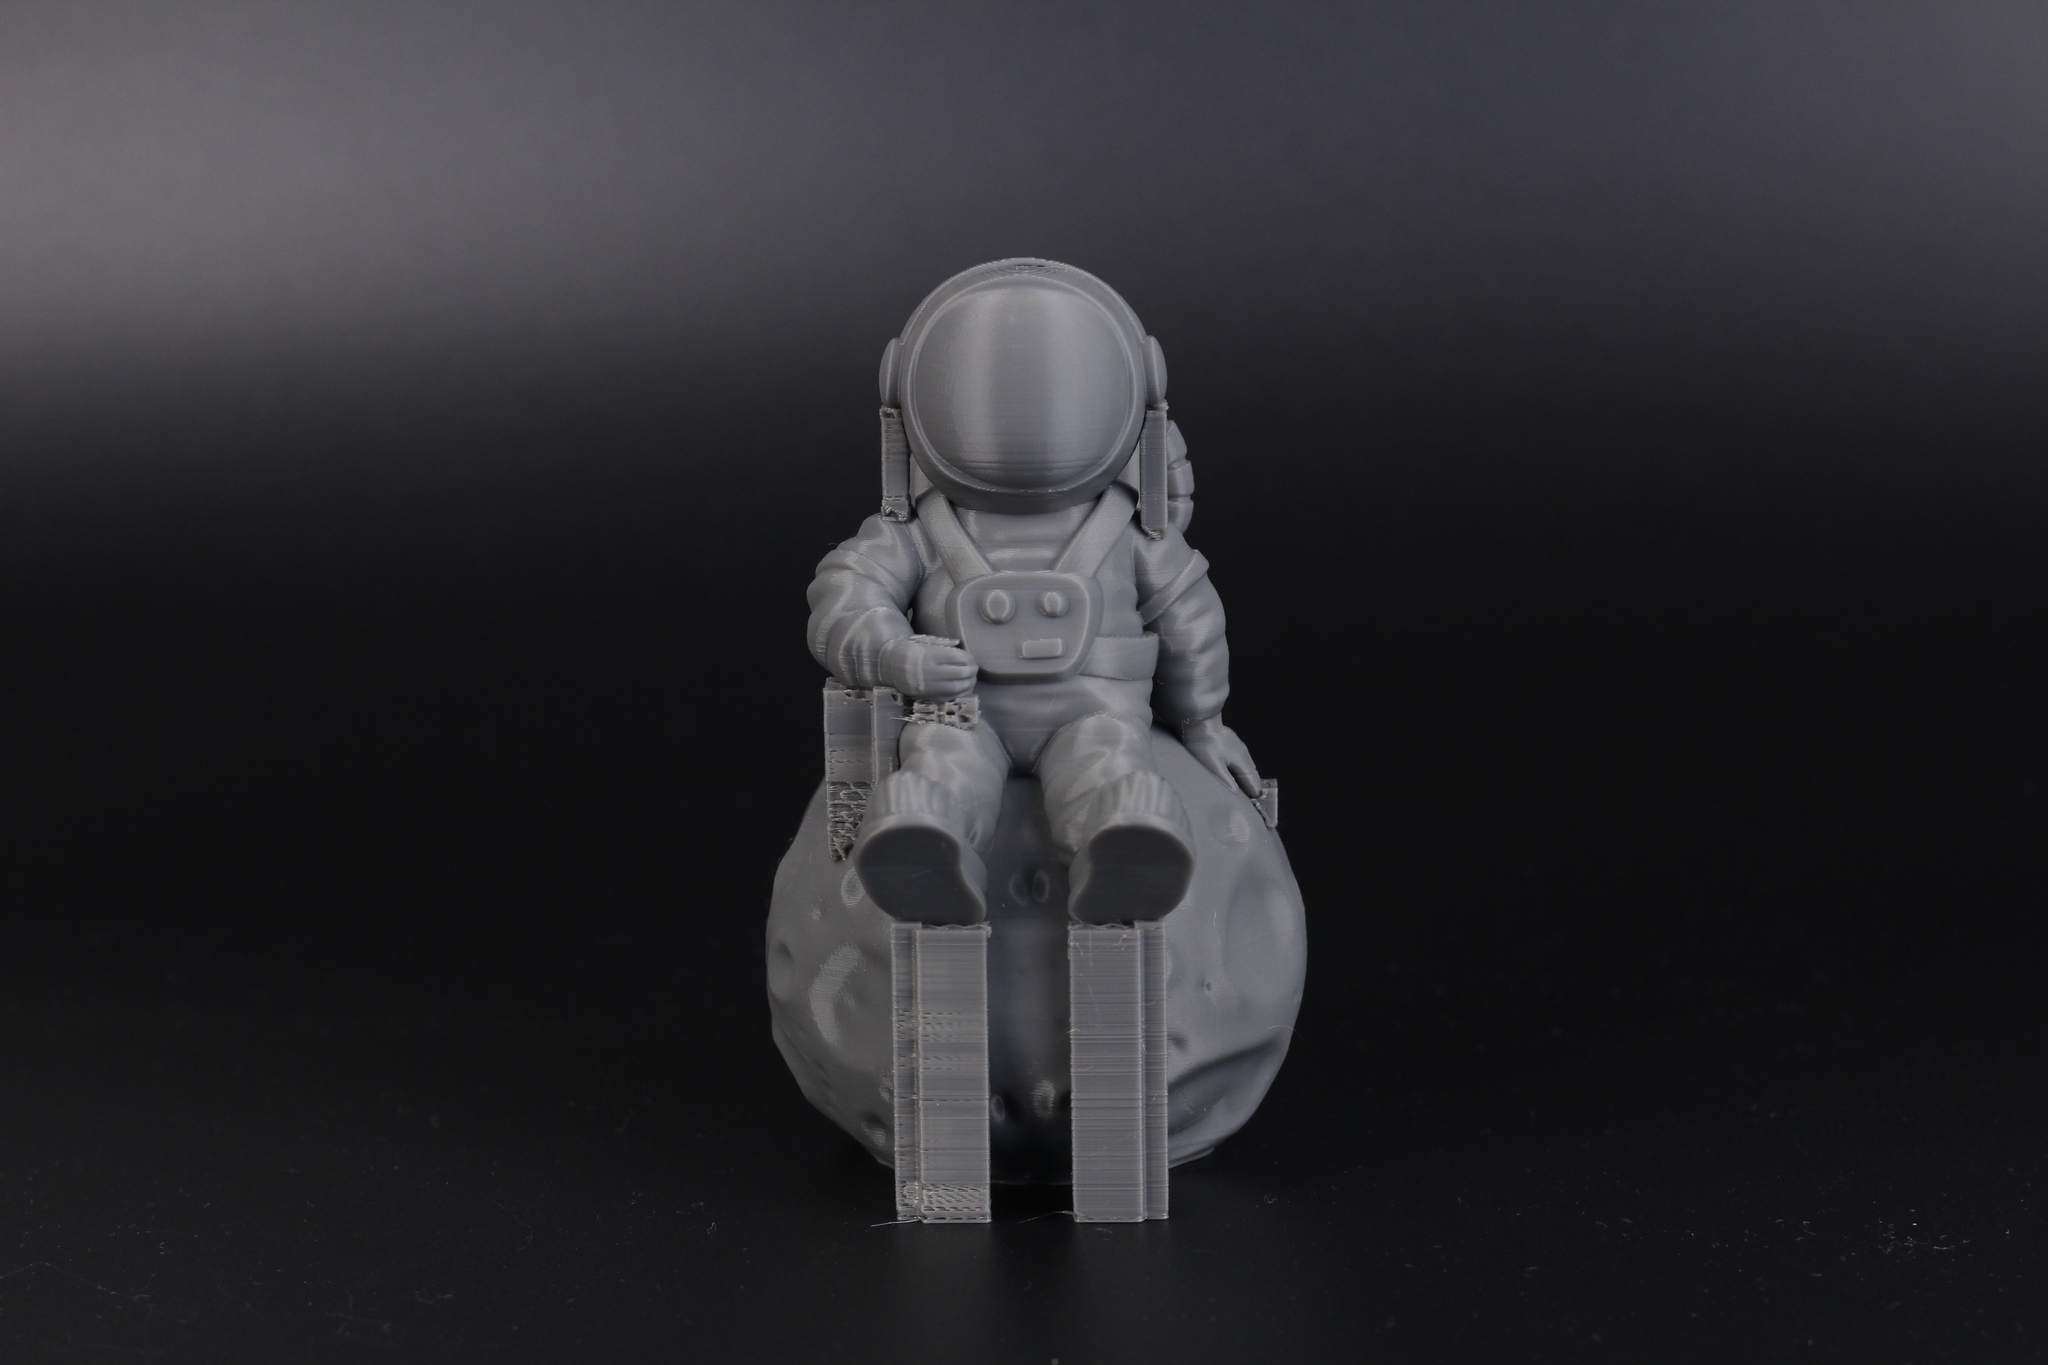 Sermoon V1 Pro Review Astronaut on the moon5 | Creality Sermoon V1 Pro Review: Can it deliver on its promises?